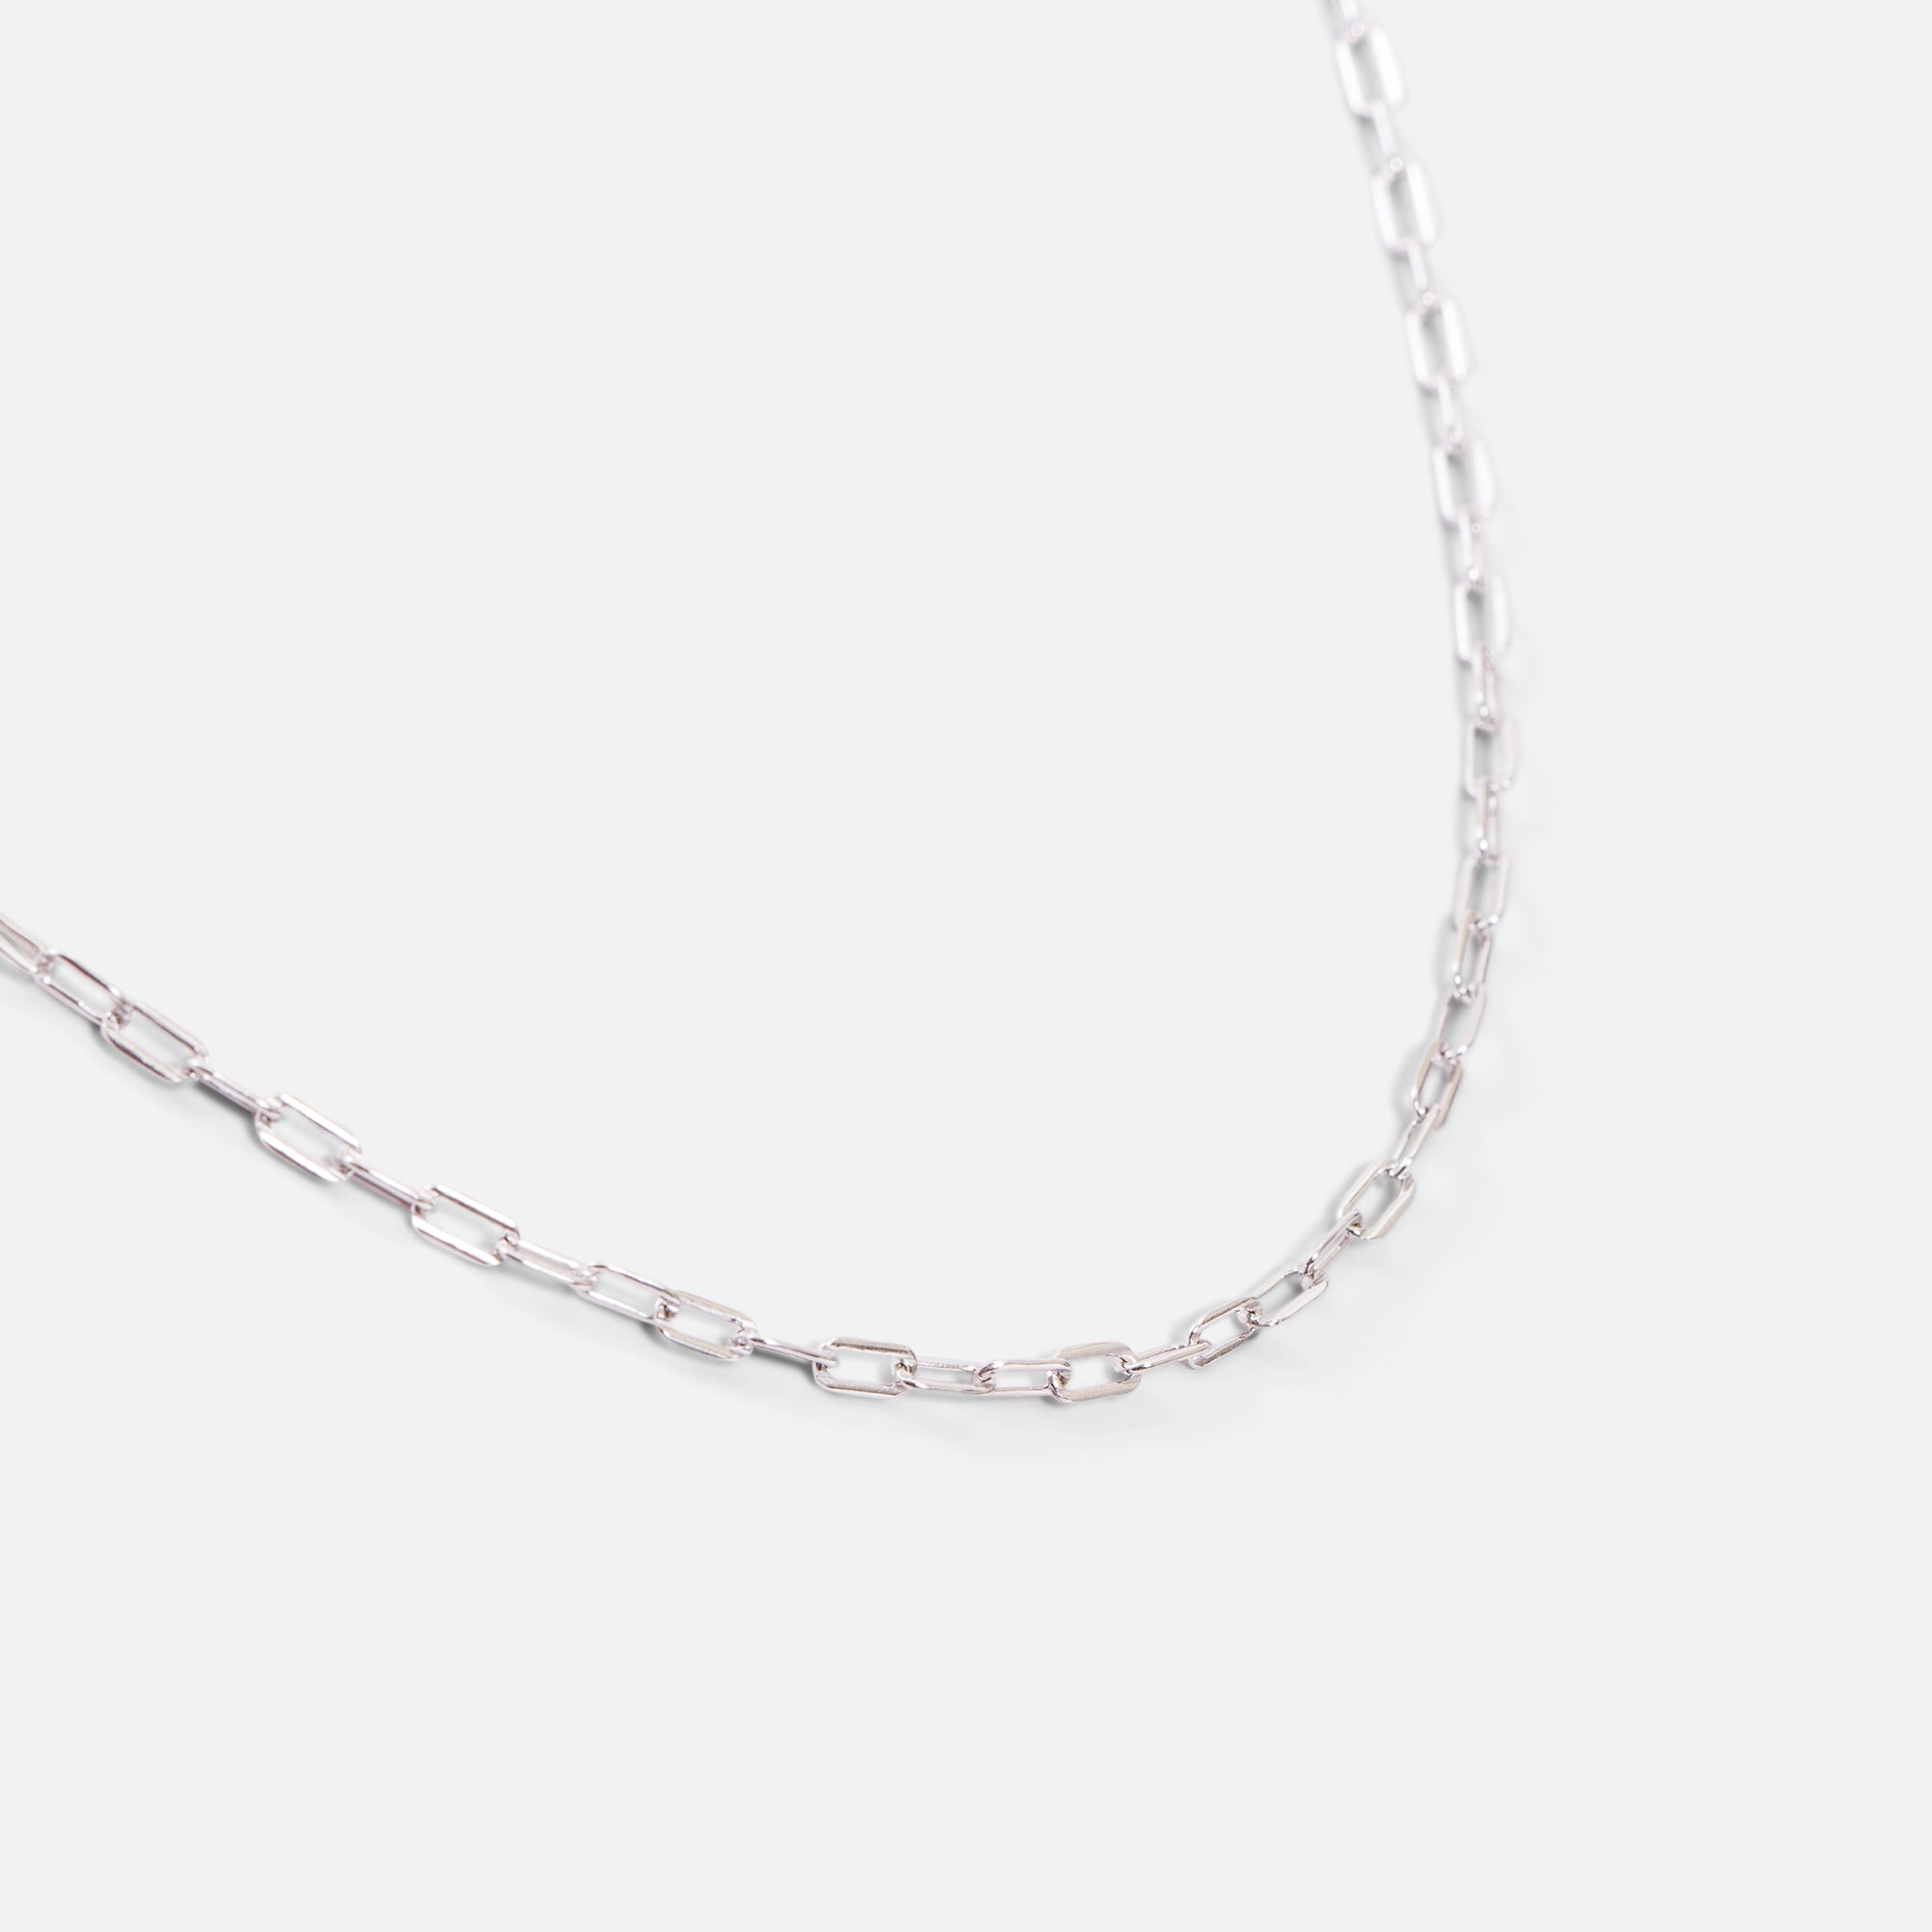 20 inch sterling silver chain